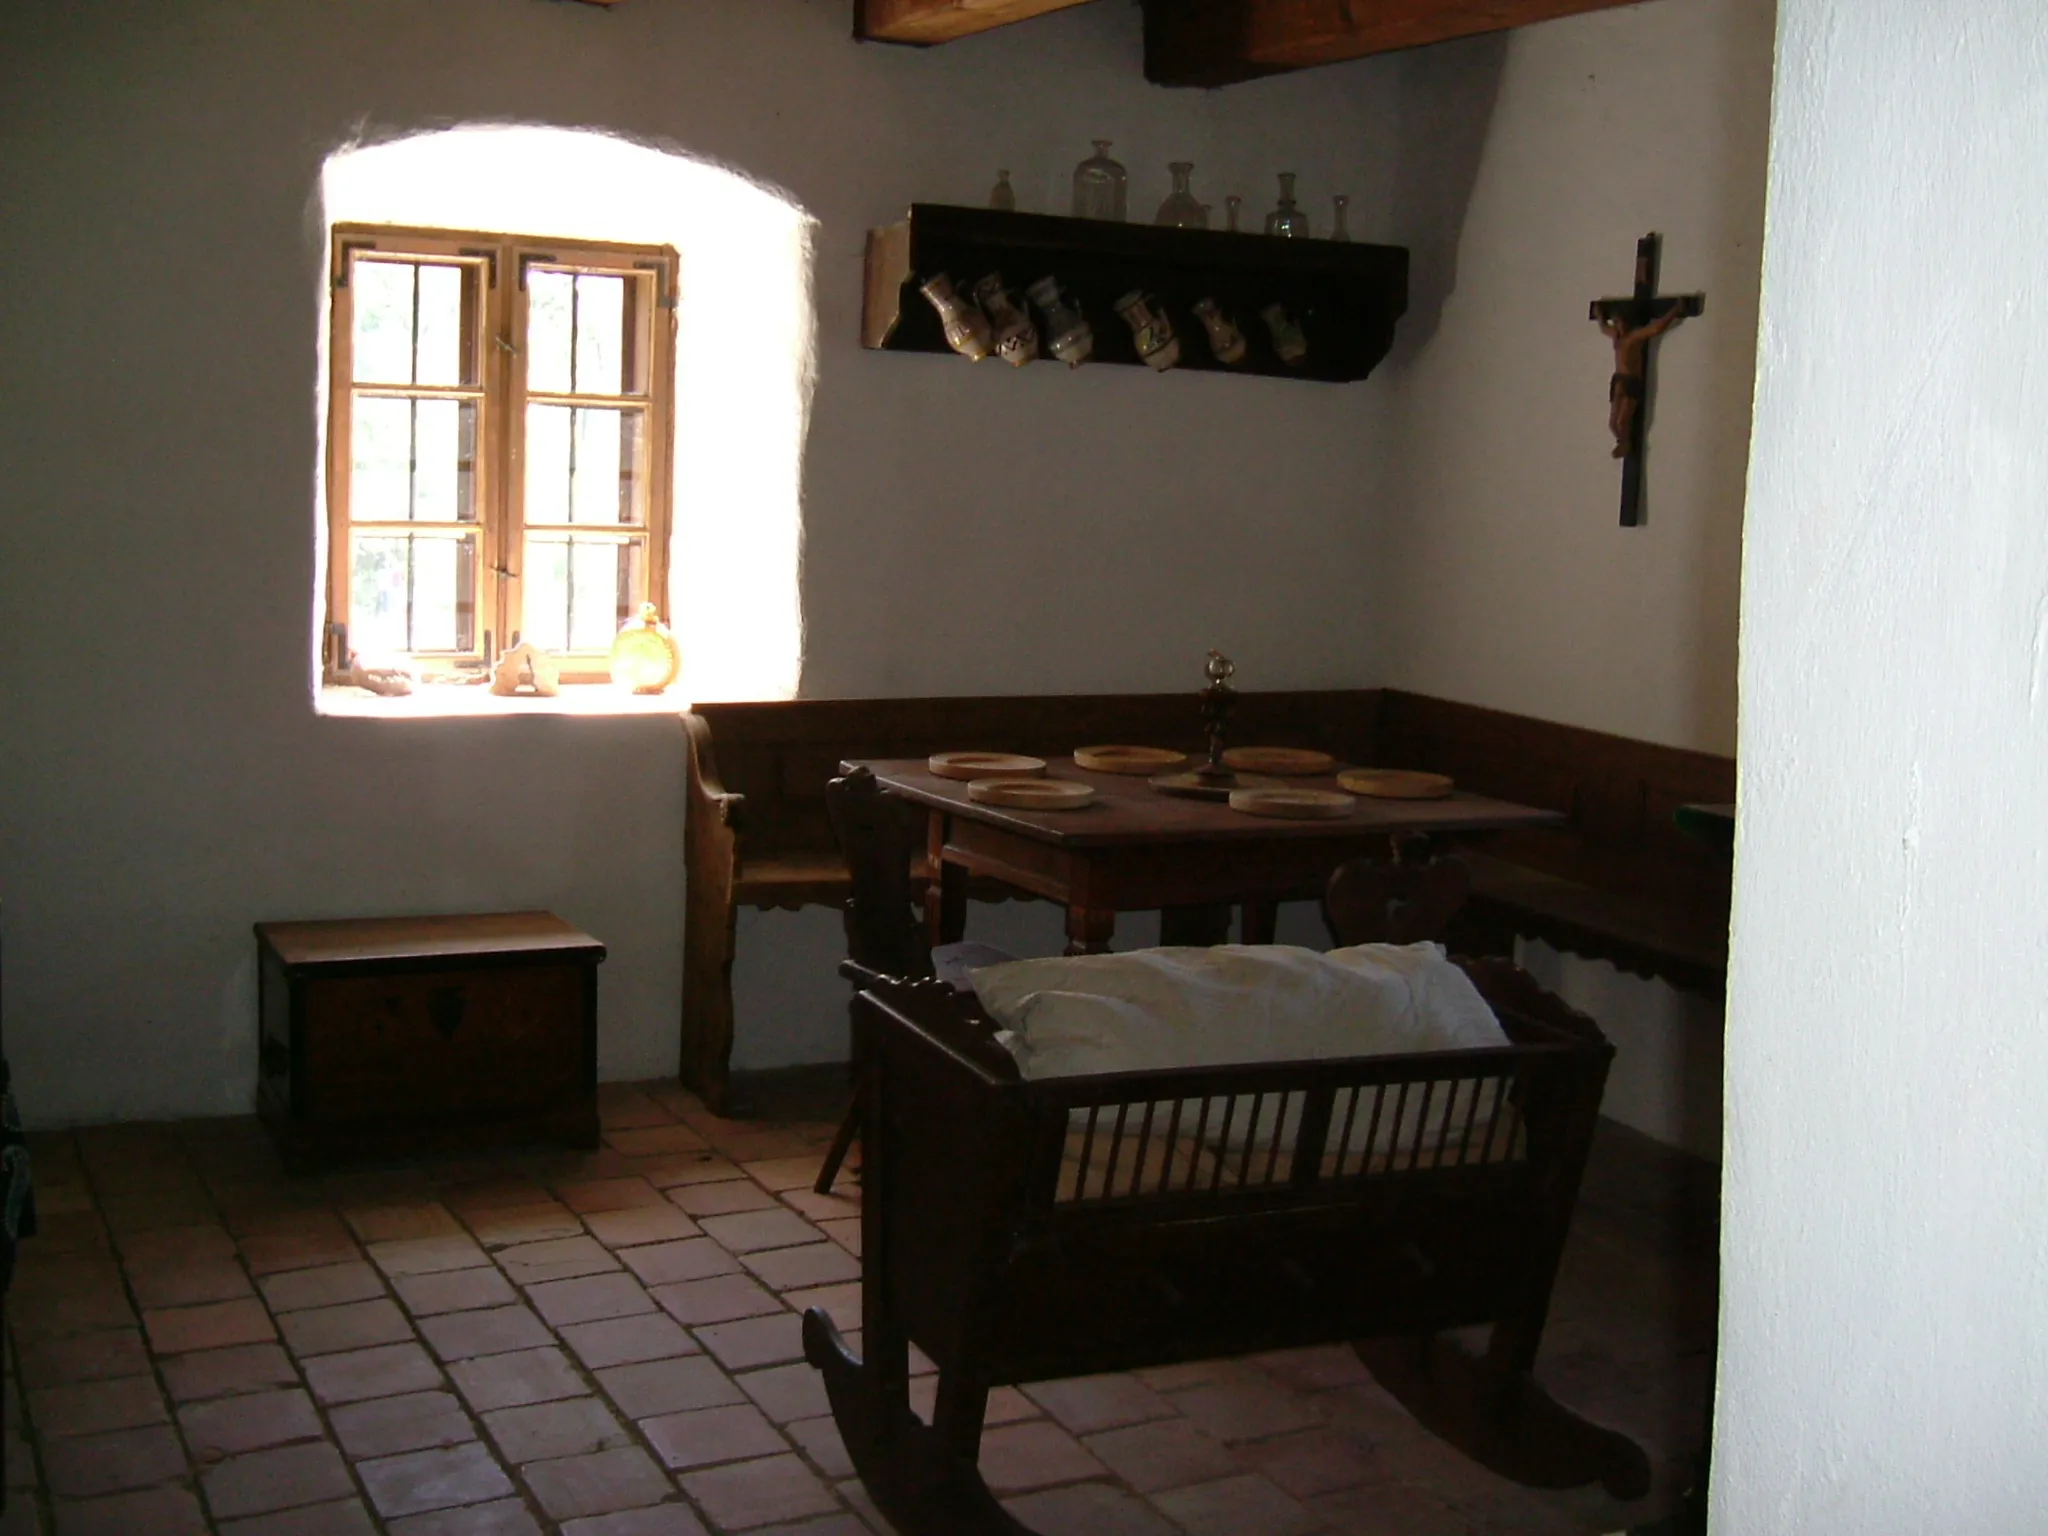 Photo showing: Miller's room in the water mill, Nyirád, Hungary